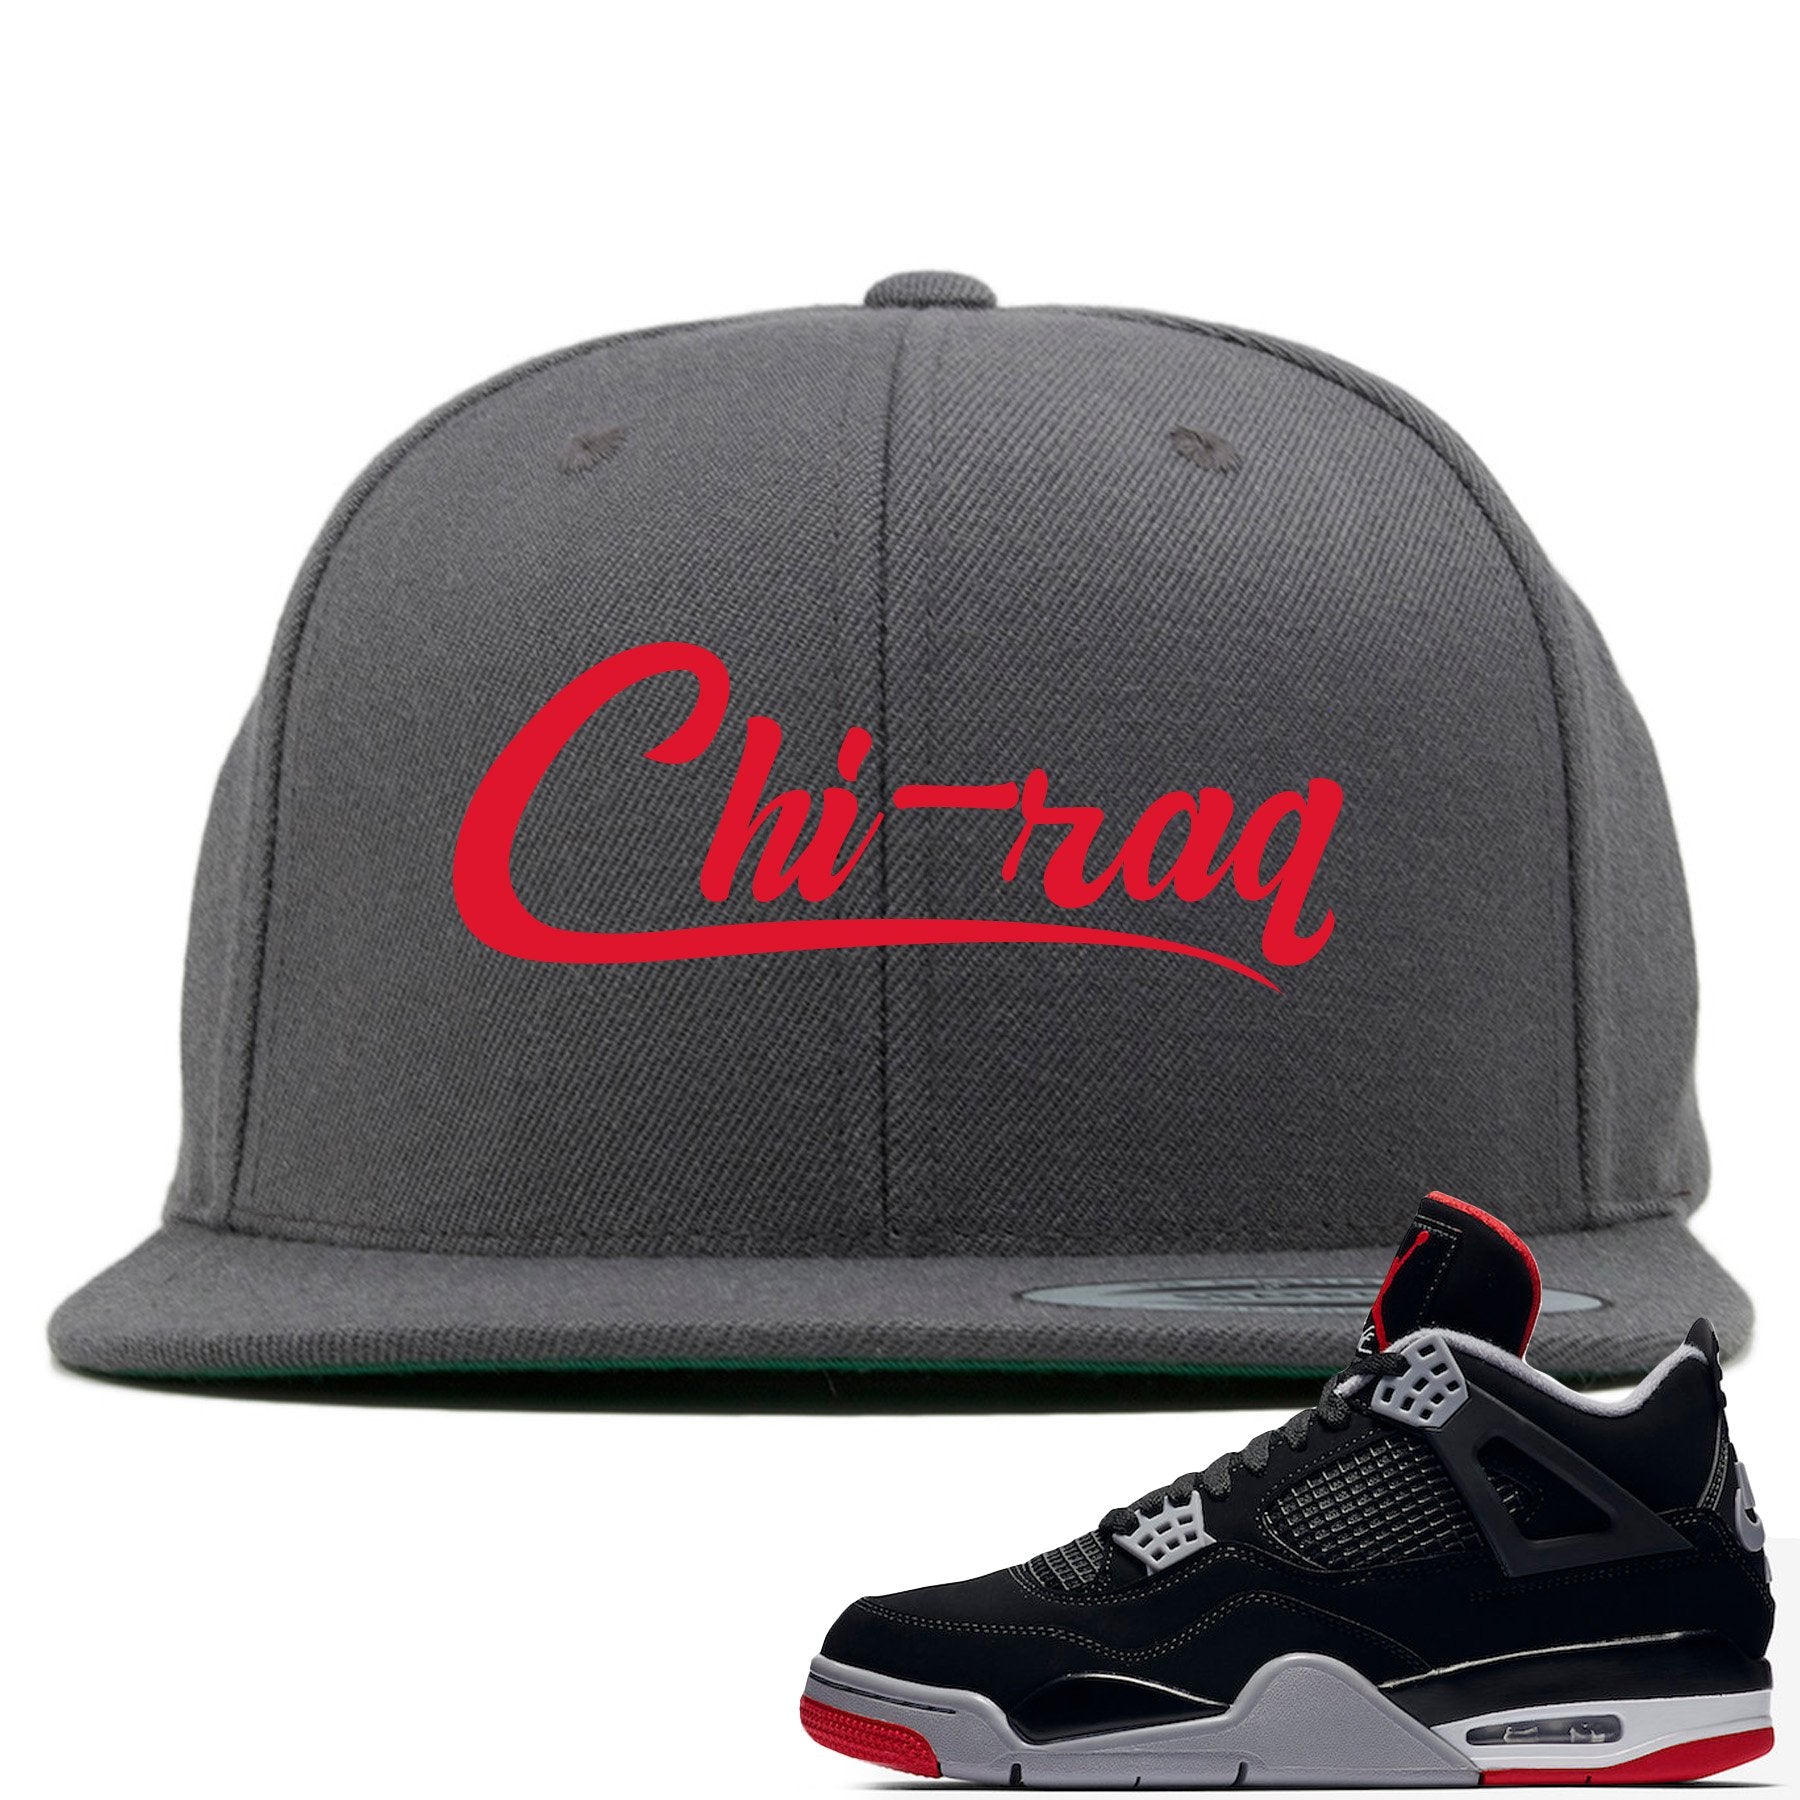 This grey and red hat will match great with your Air Jordan 4 Bred shoes